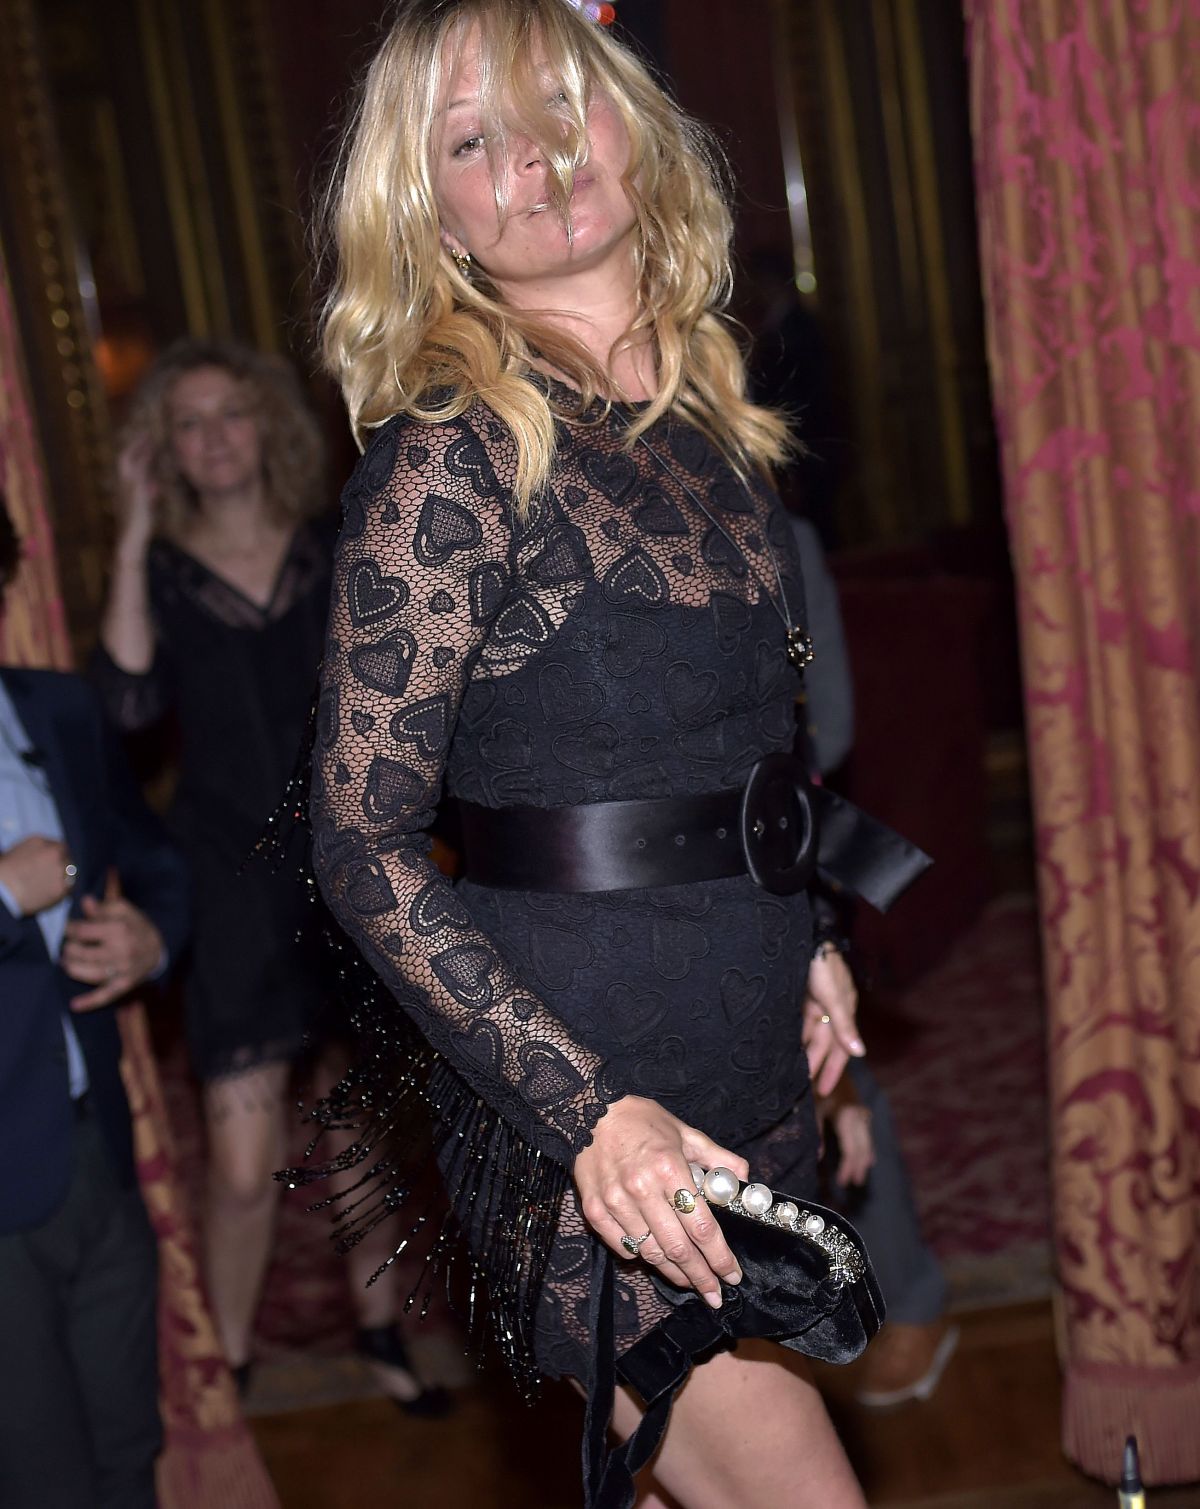 KATE MOSS at Miu Miu Club and Croisiere 2017 Collection Presentation 07/03/2016 ...1200 x 1509